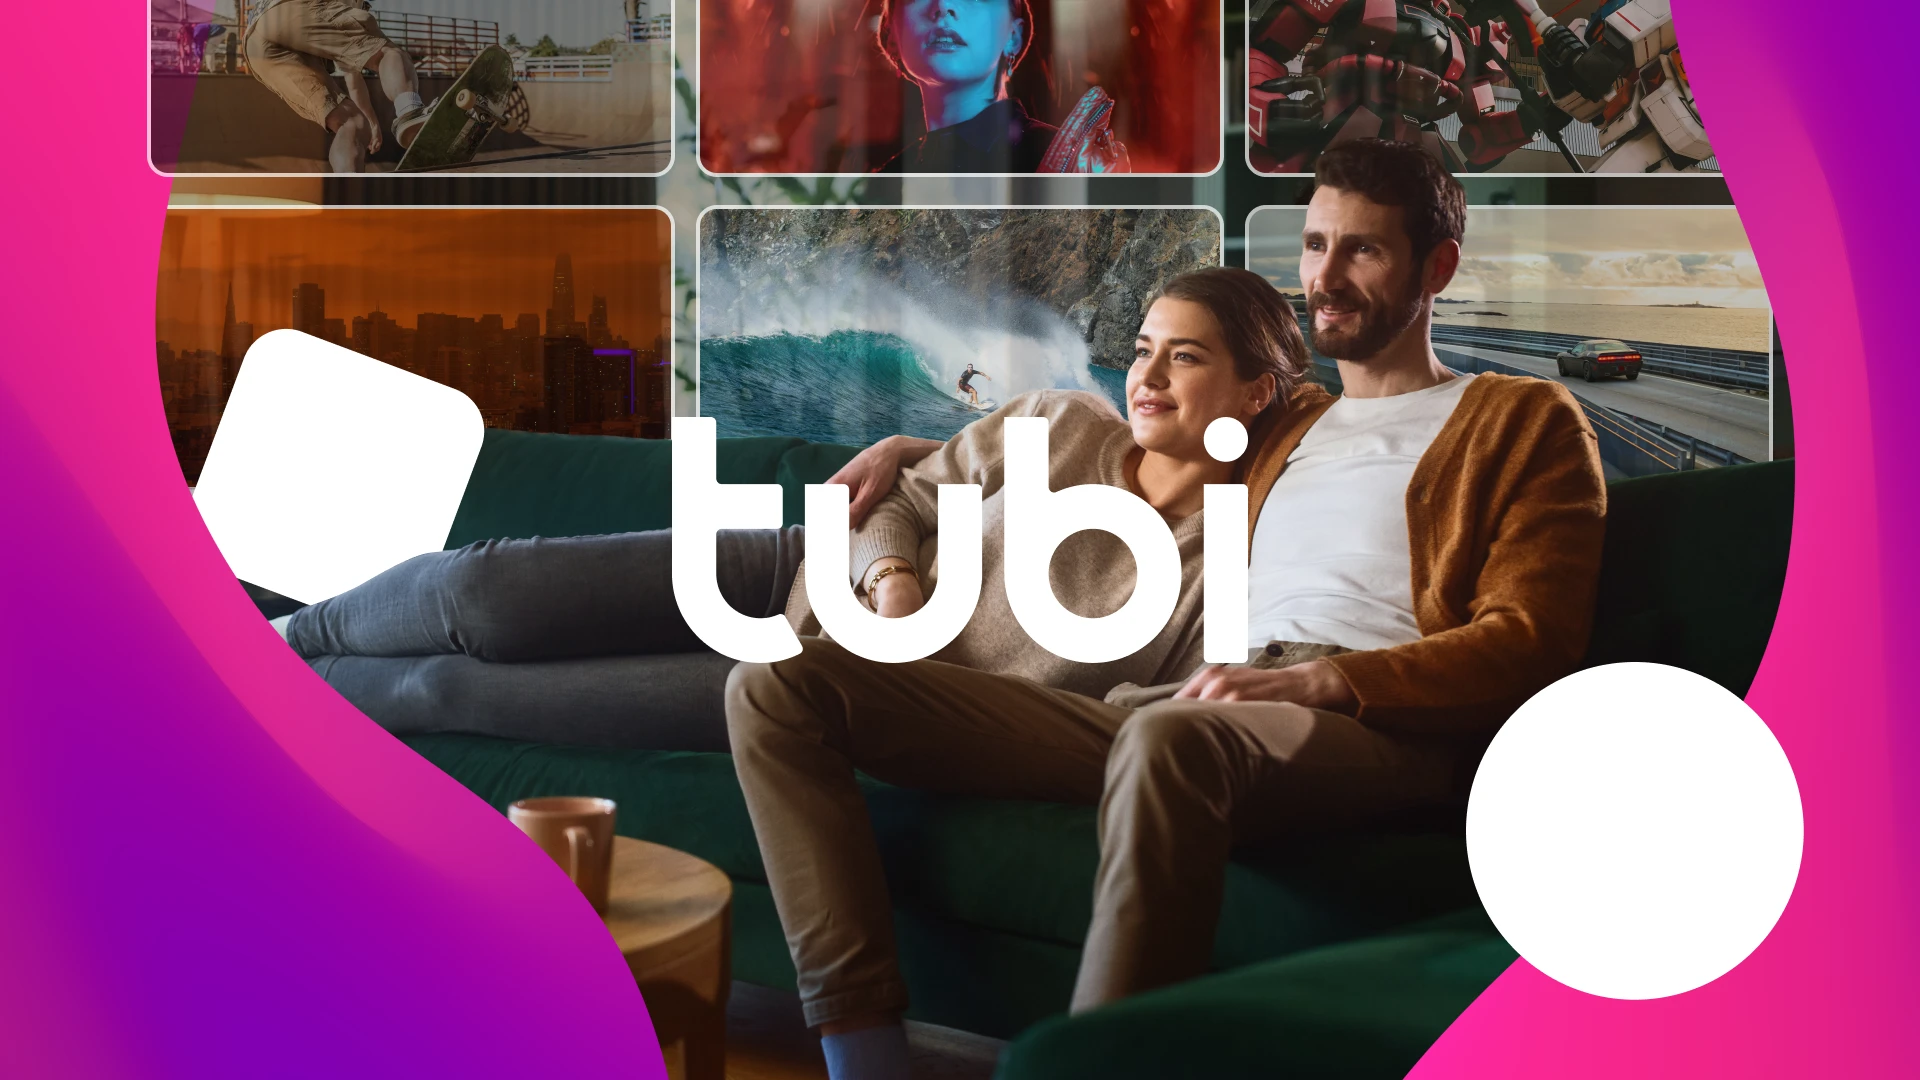 Tubi Advertising Guide: How it Works & Ad Costs